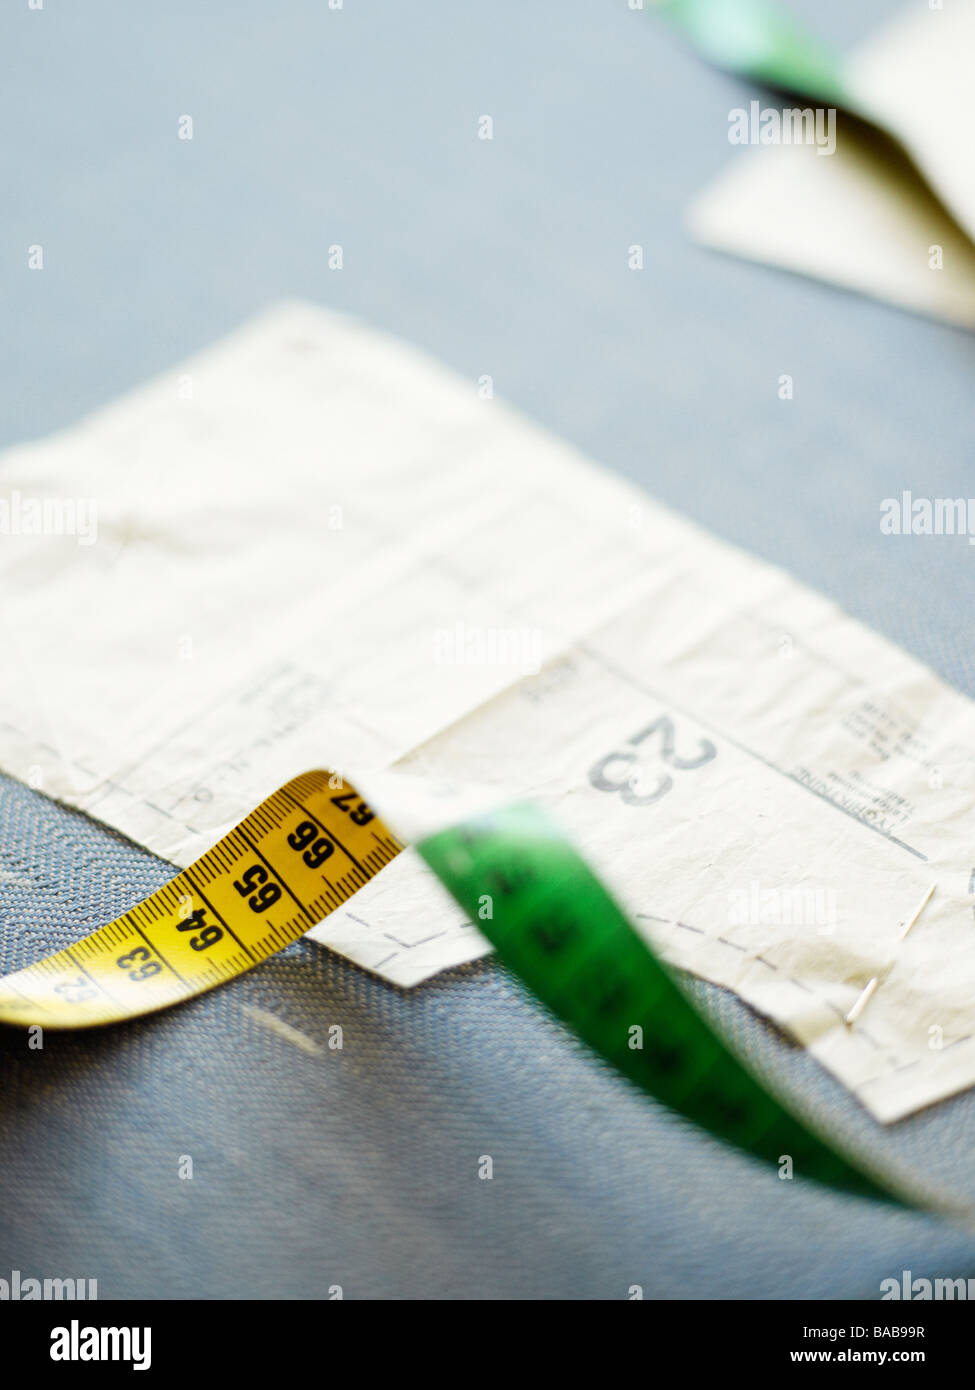 Measuring-tape and a pattern Sweden. Stock Photo